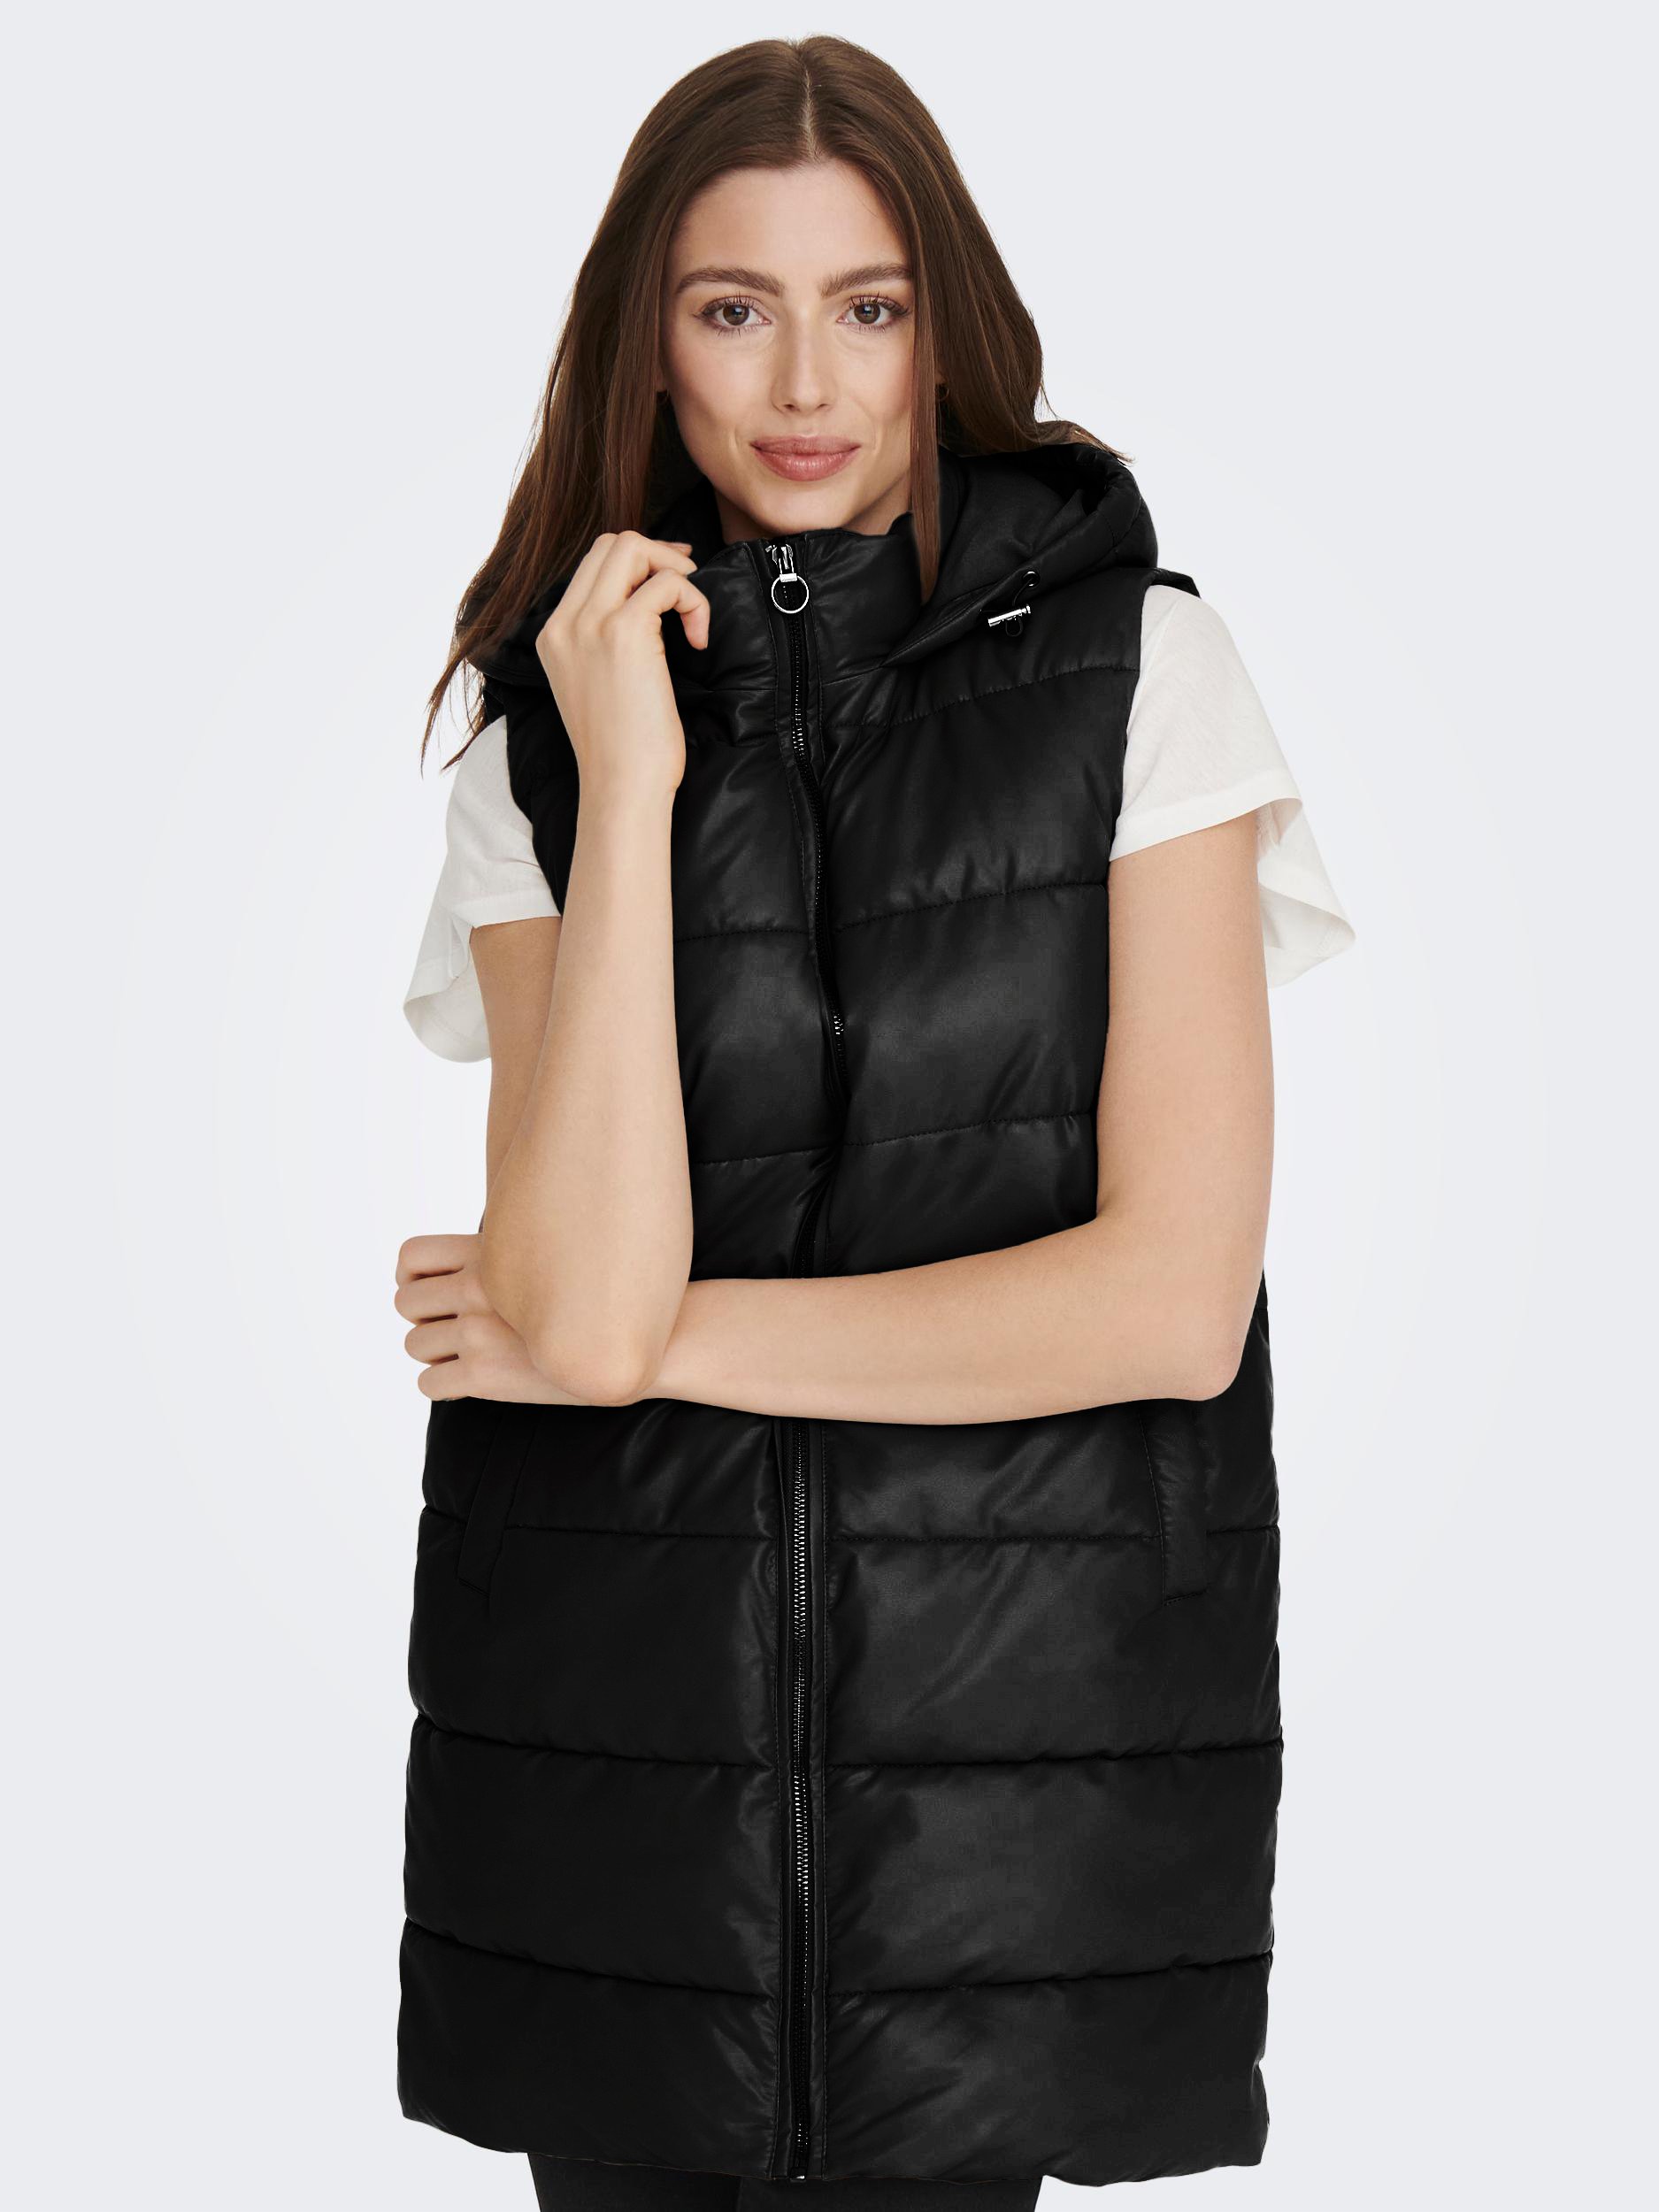 Anja faux-leather hooded puffer jacket, BLACK, large